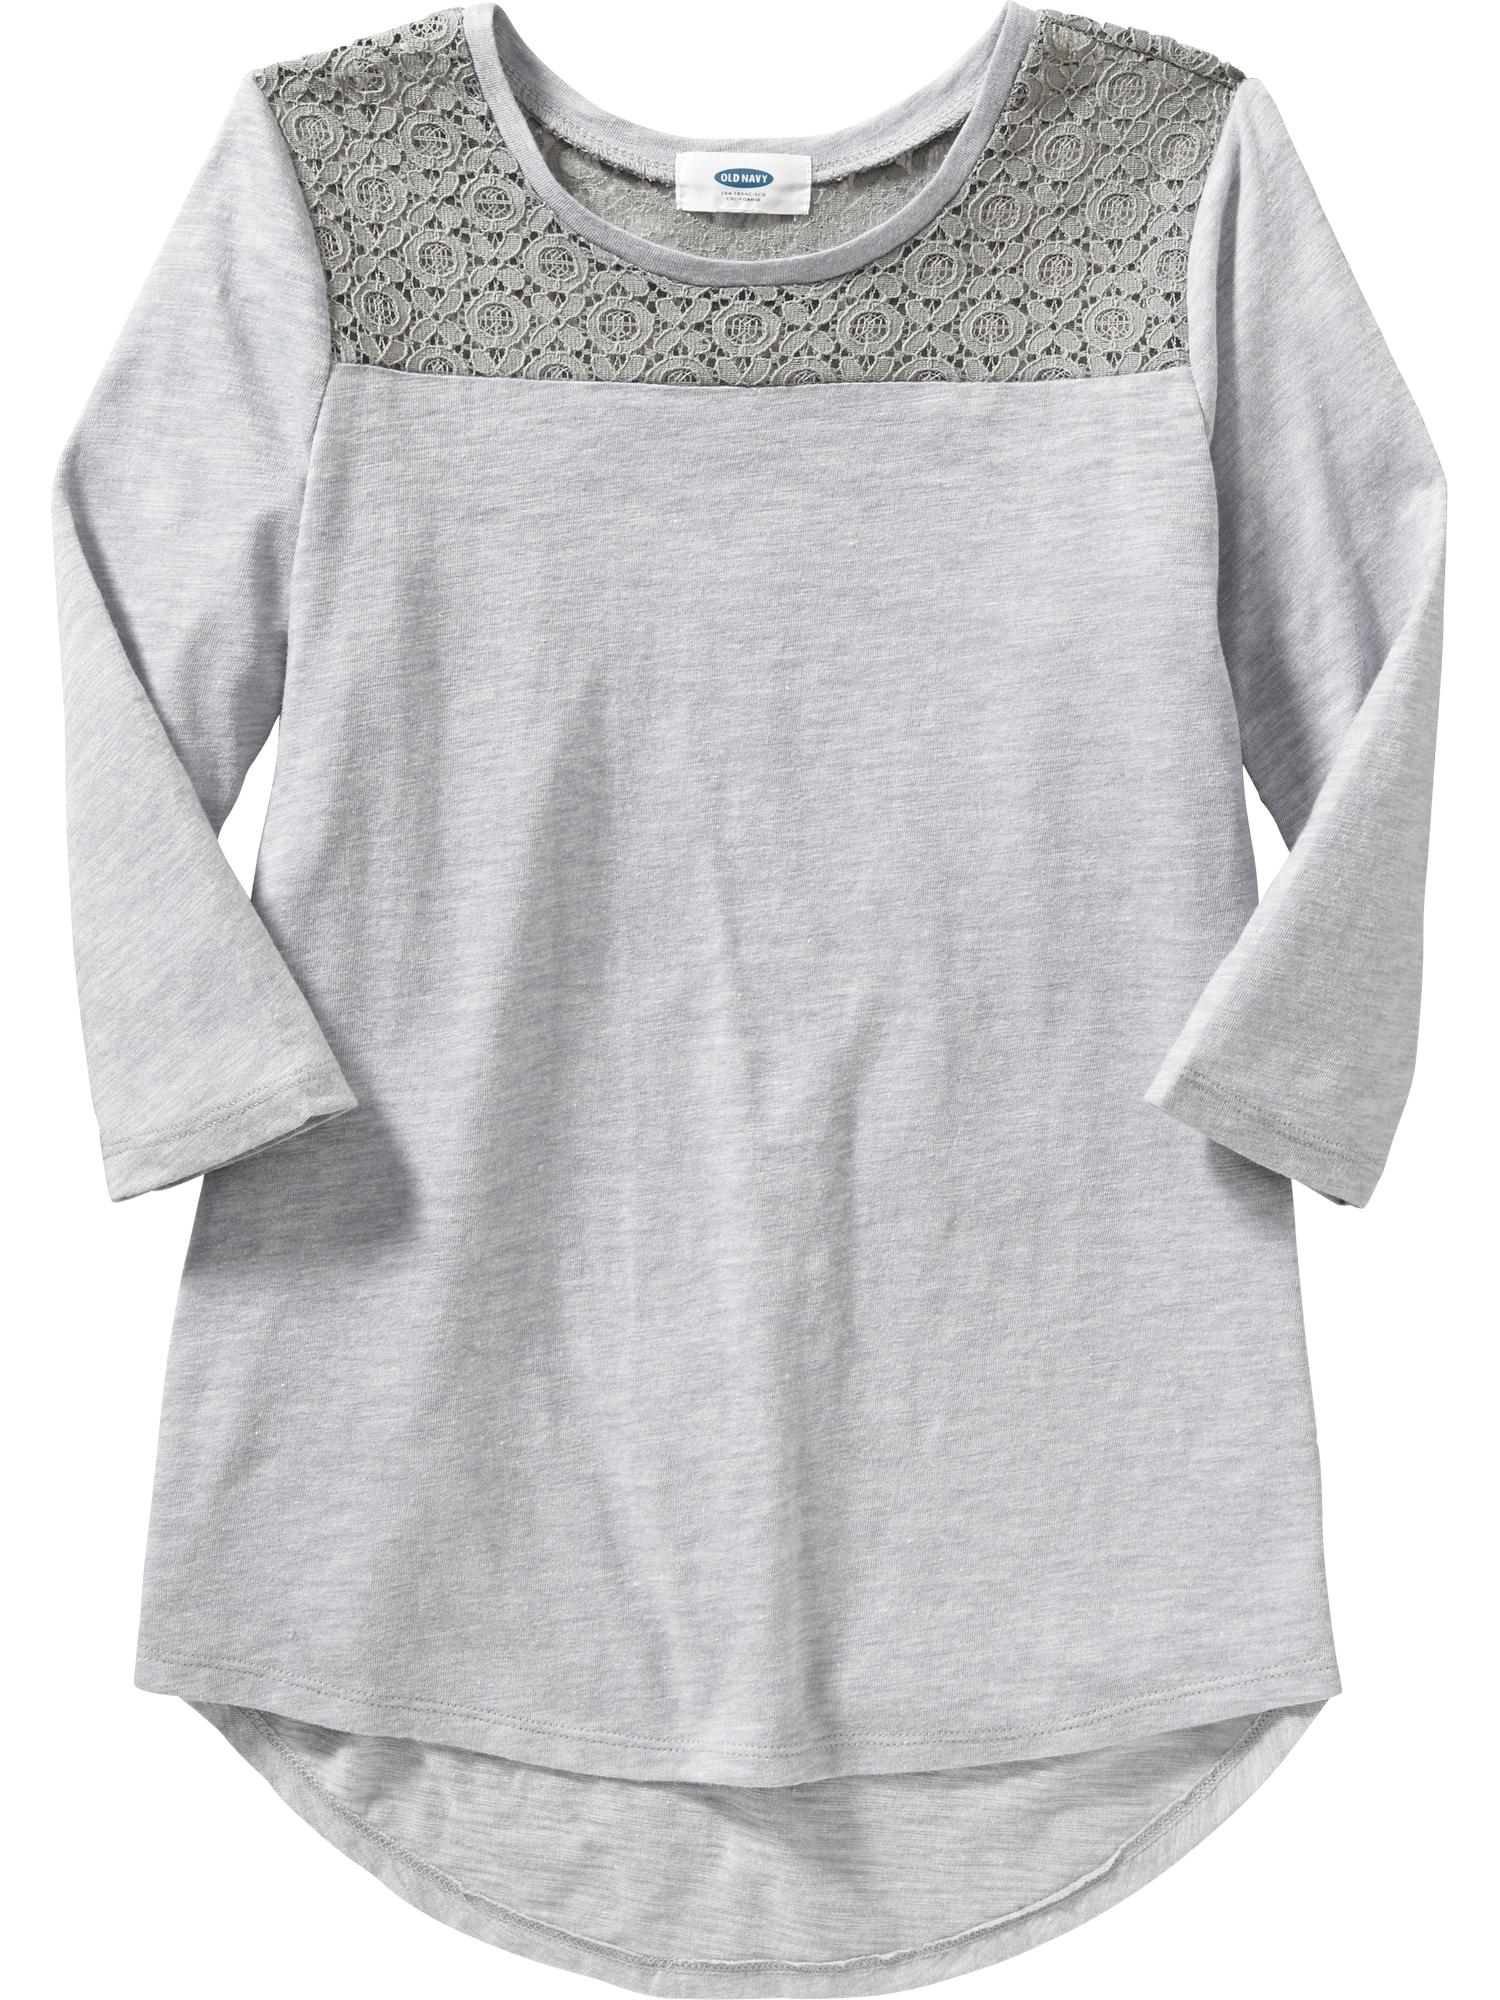 Girls Lace-Inset Tunic | Old Navy